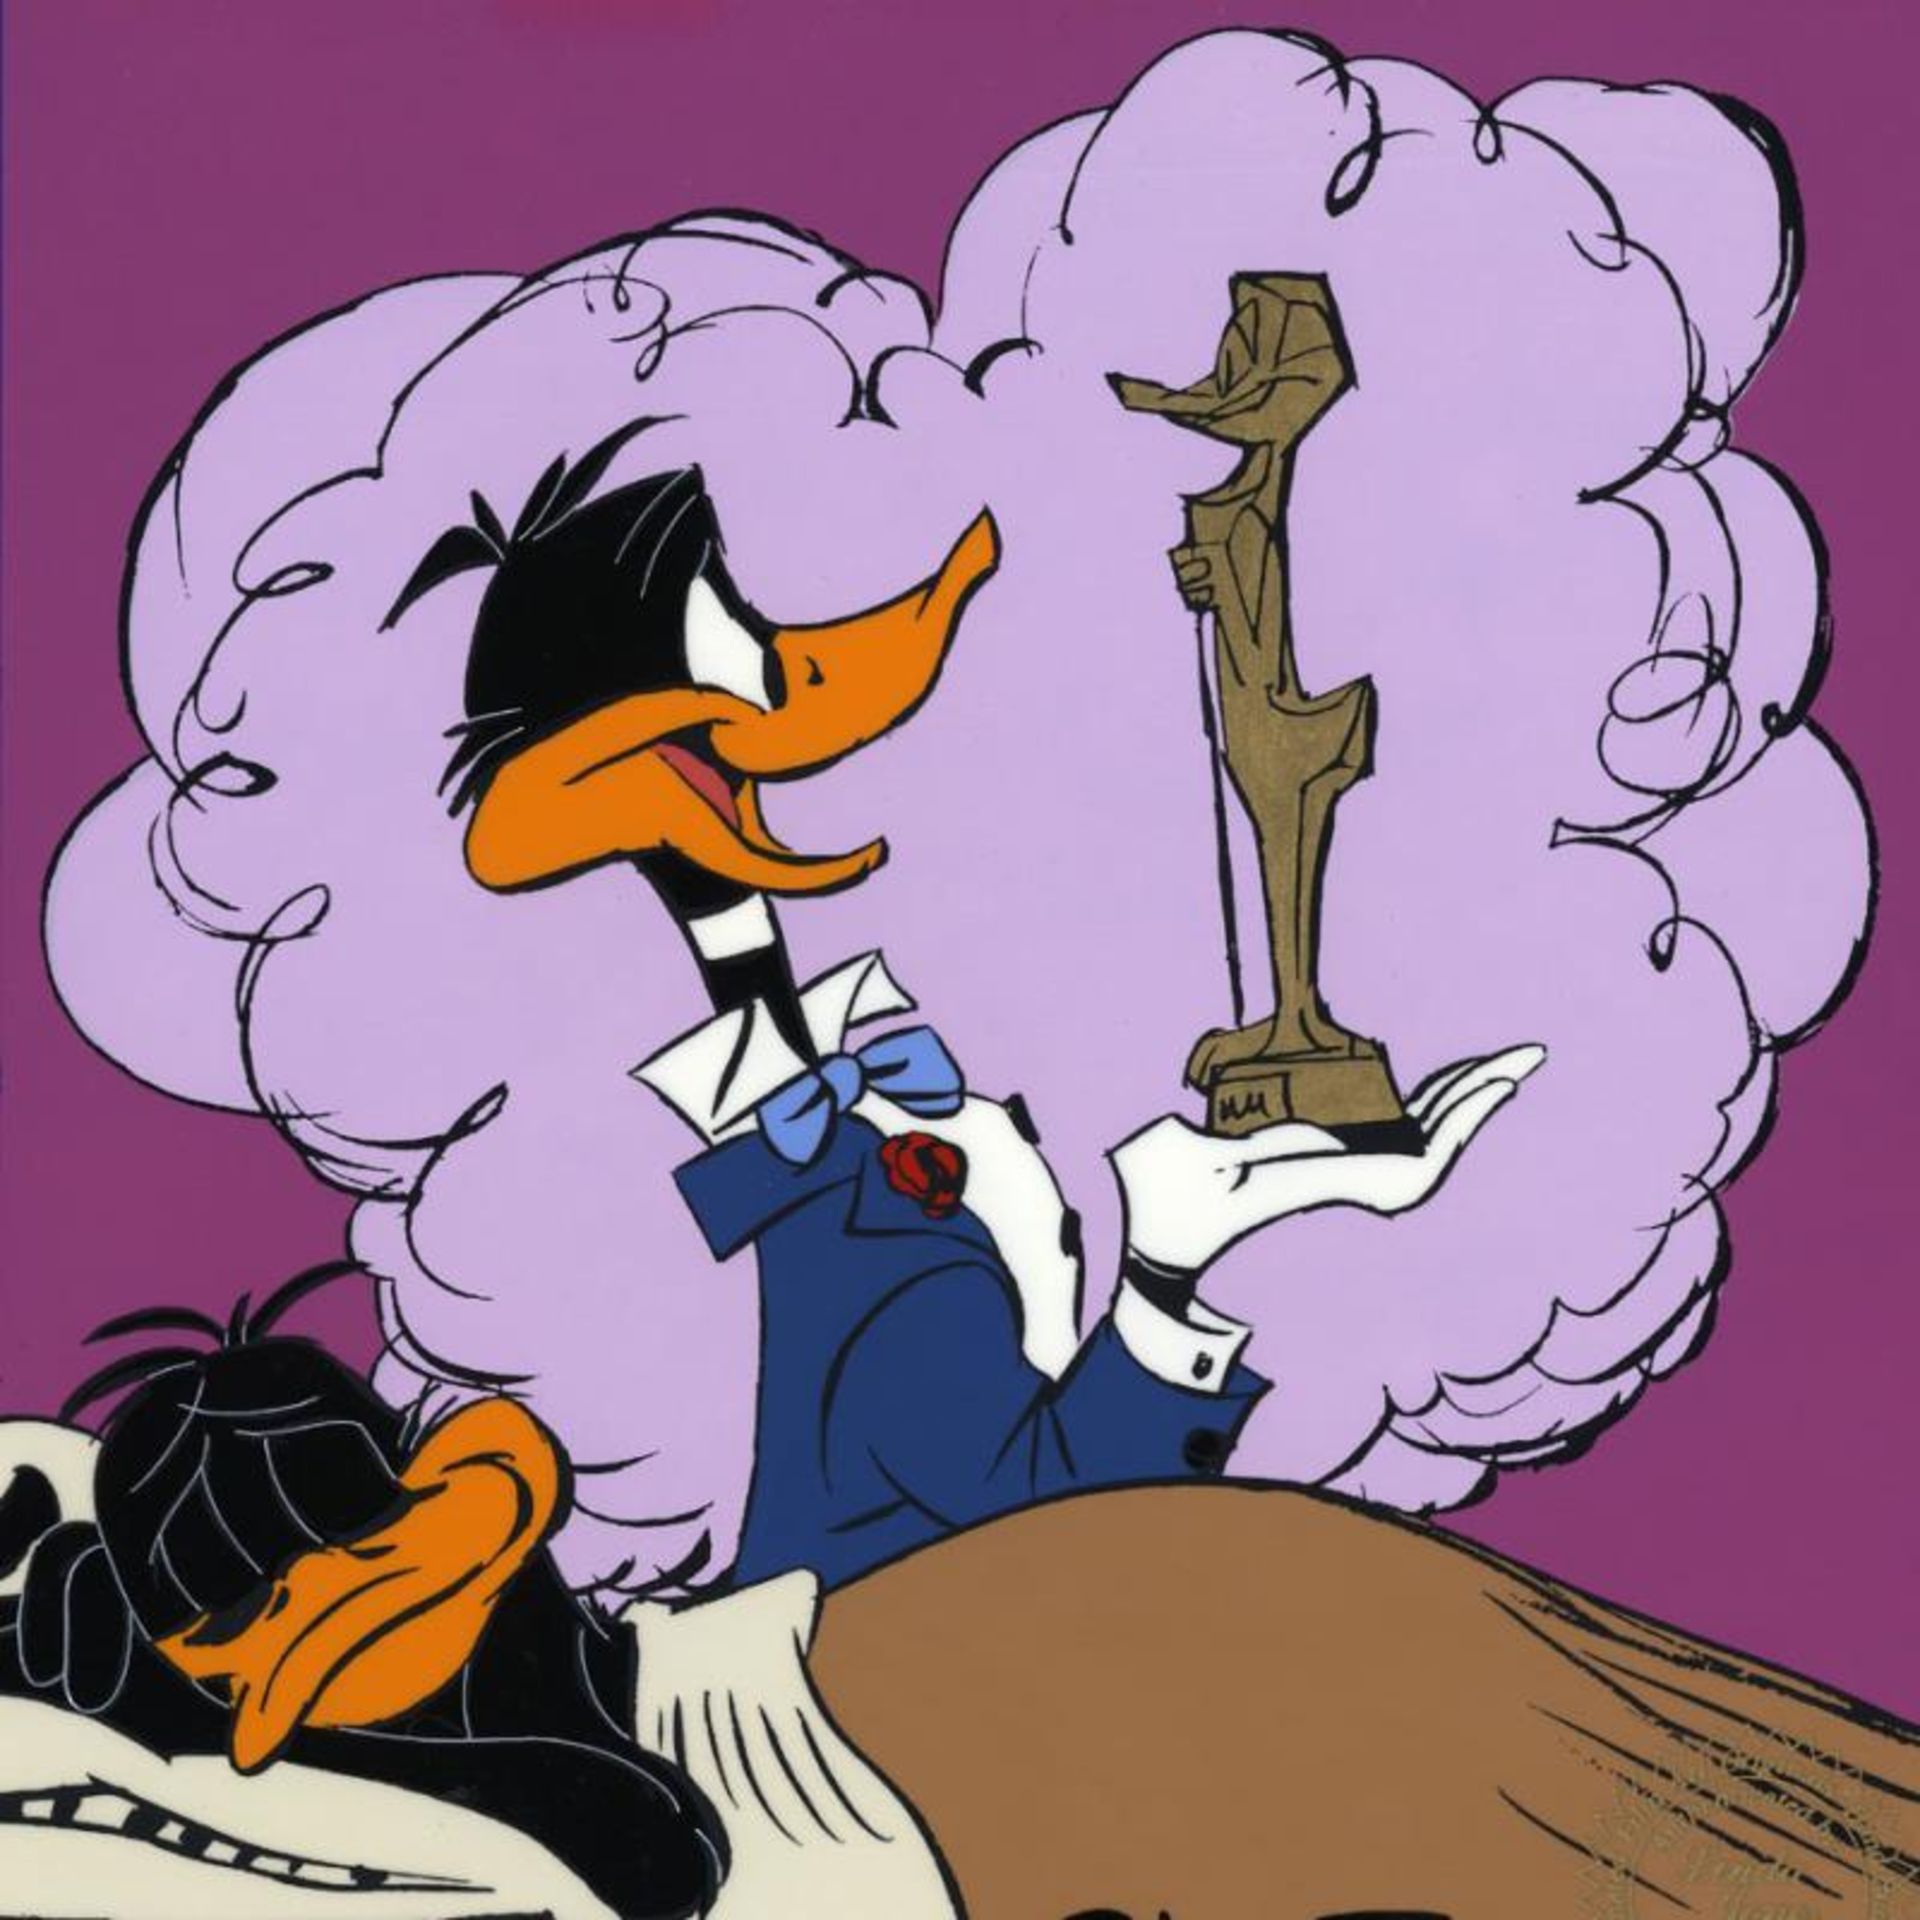 Daffy Ducks Impossible Dream by Chuck Jones (1912-2002) - Image 2 of 2